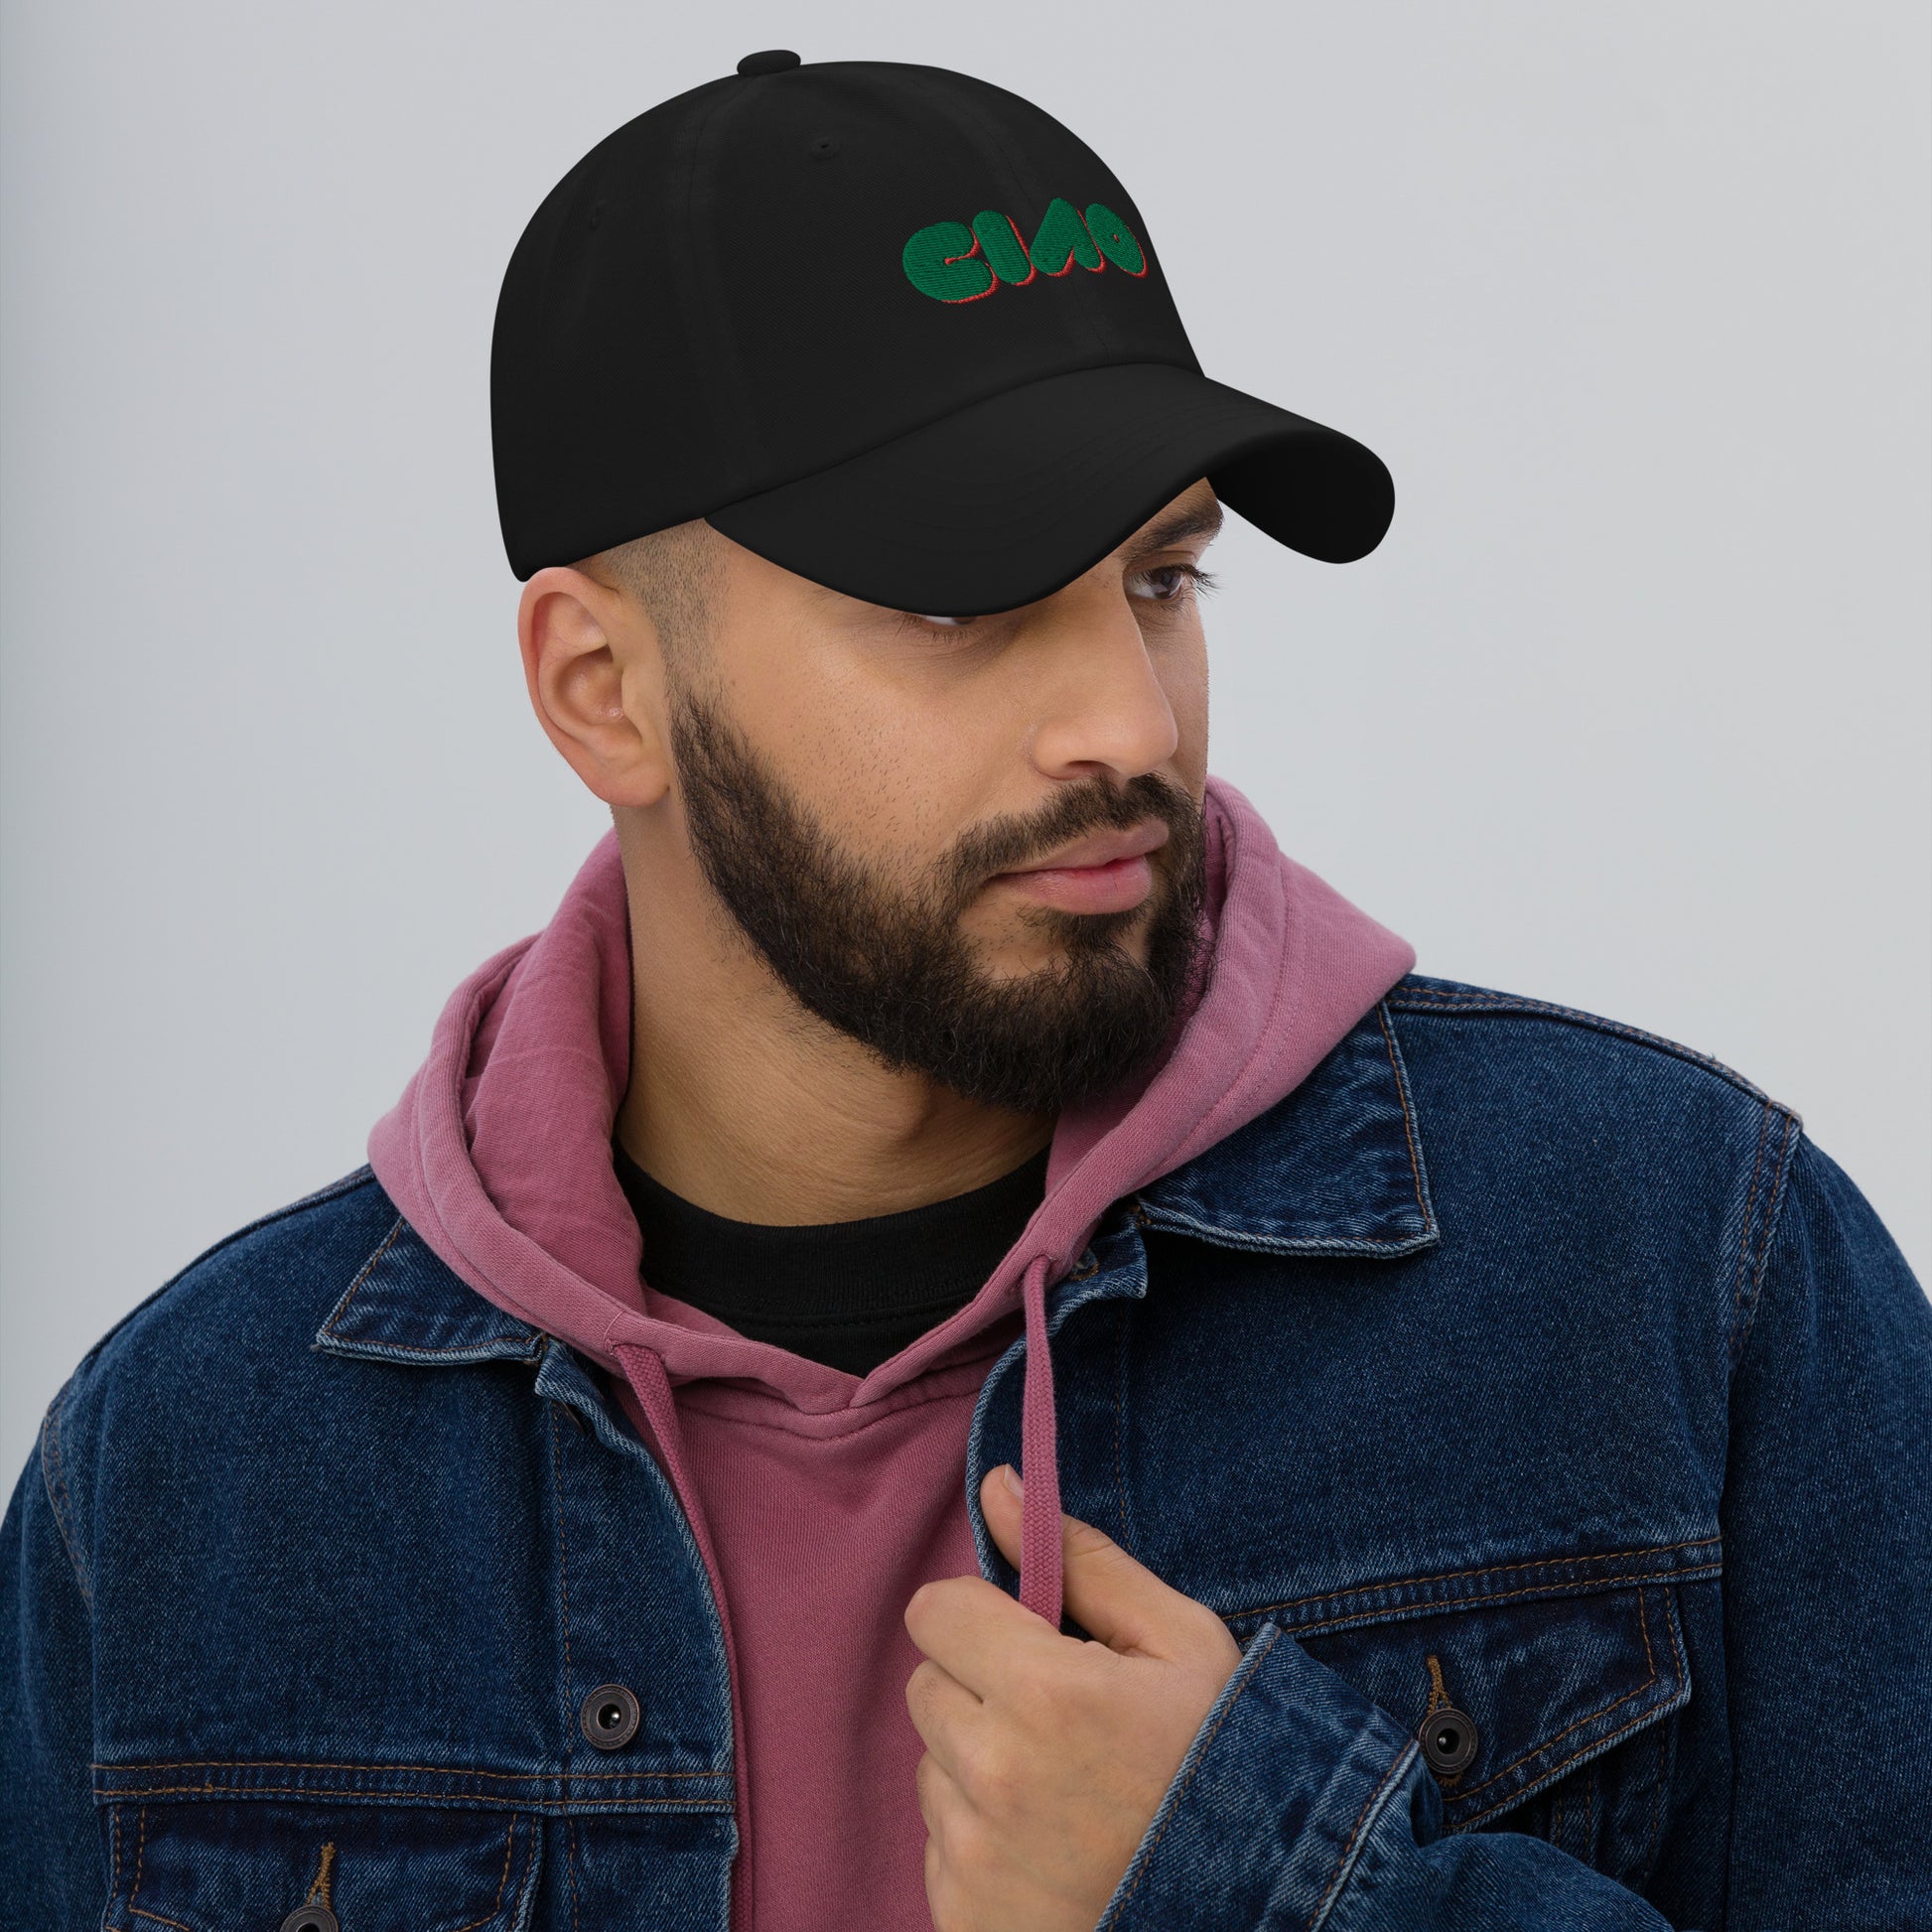 CIAO Bubble - Dad hat - PIZZ